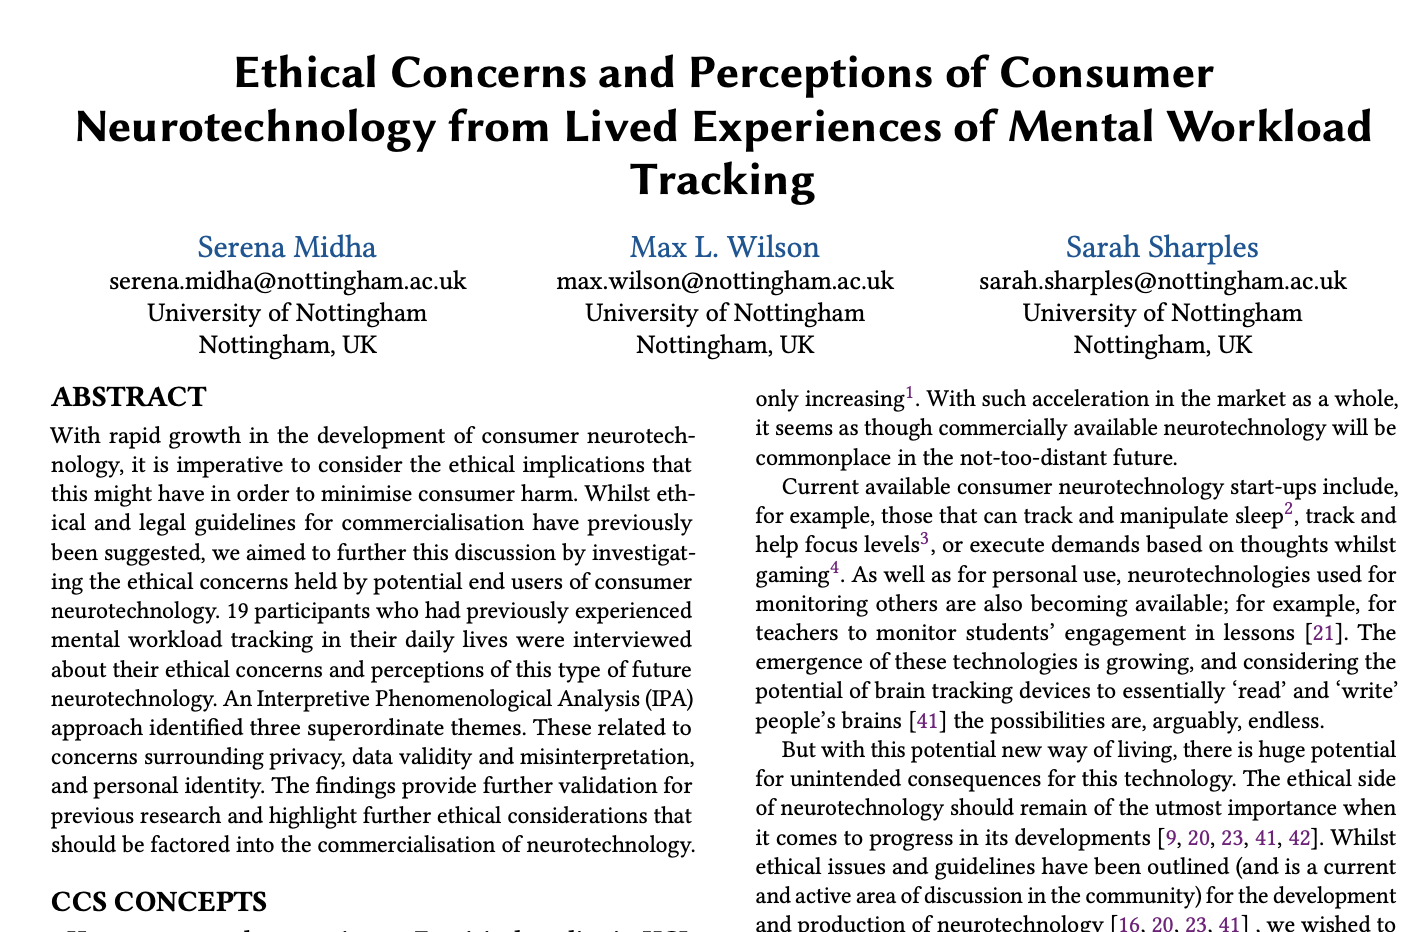 image of research paper entitled Ethical Concerns and Perceptions of Consumer Neurotechnology from Lived Experiences of Mental Workload Tracking.